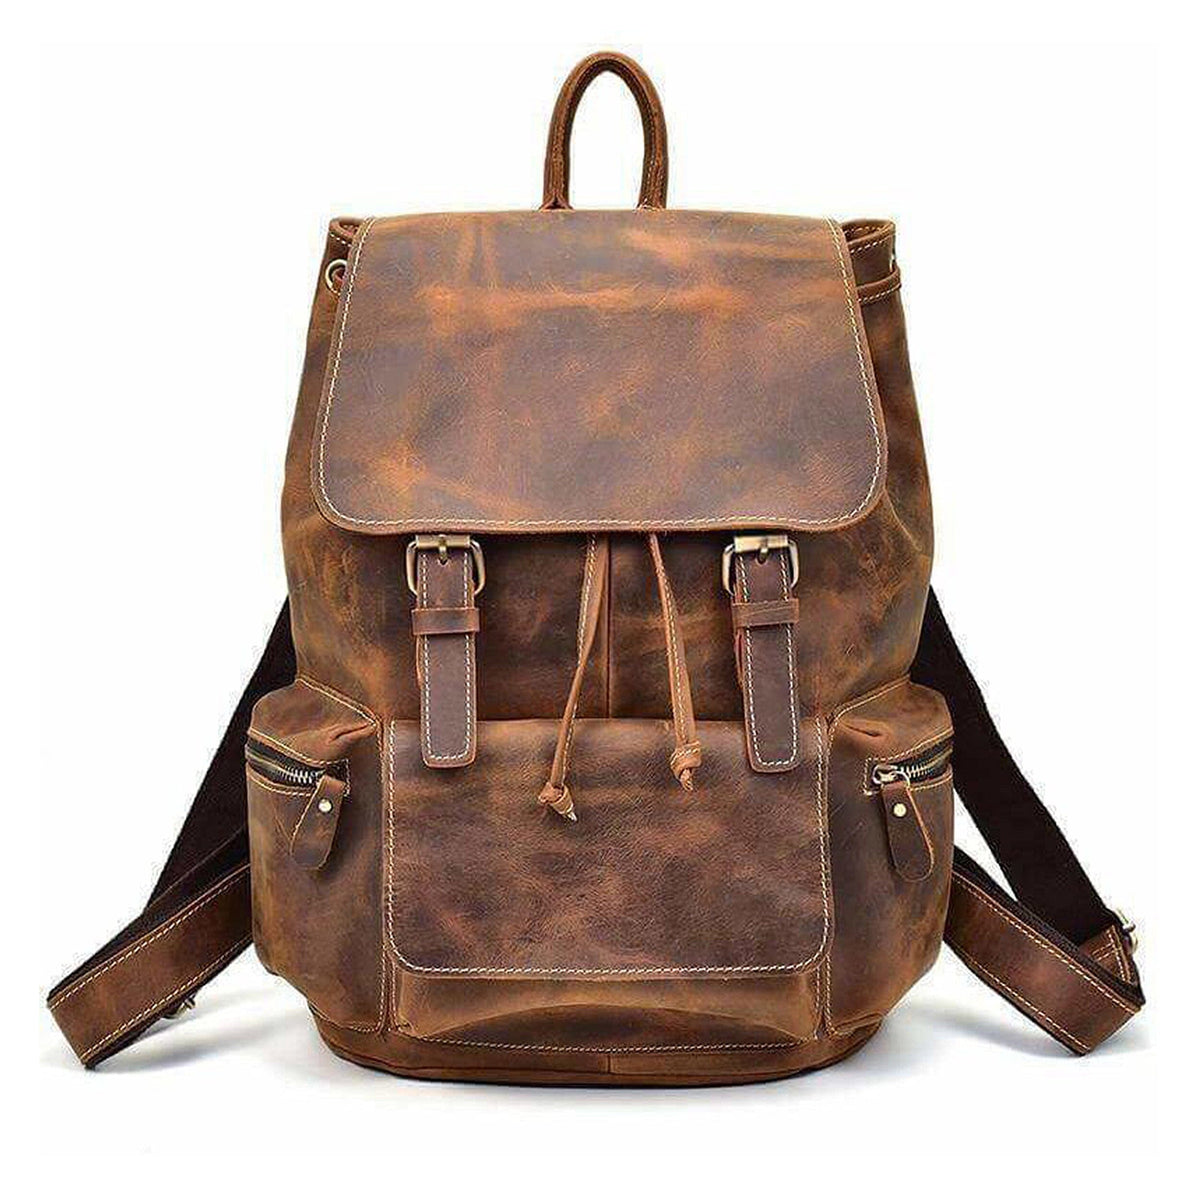 Cognac Multi Compartment Backpack with Lining - PEDRO TW